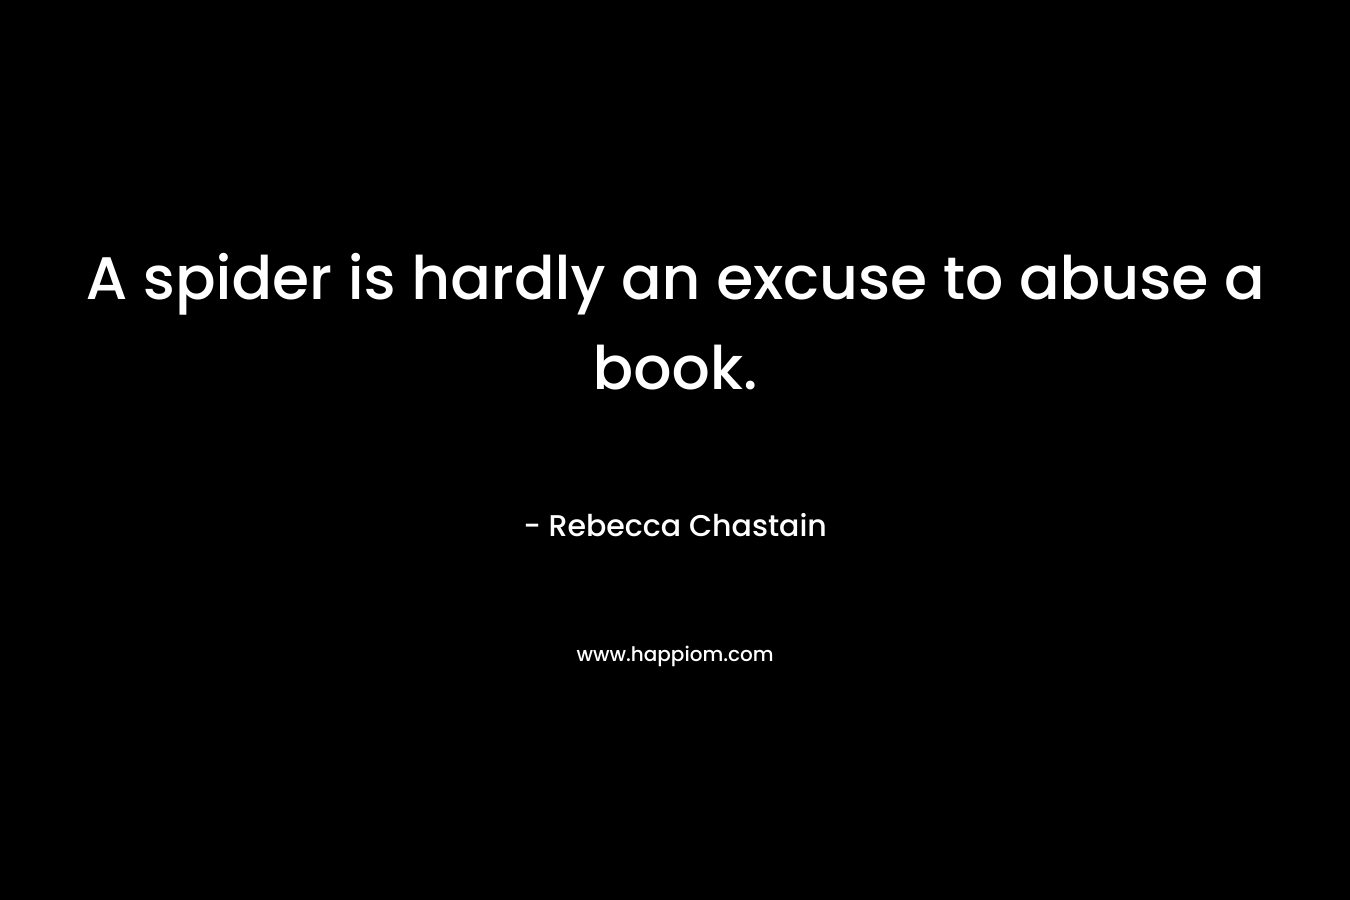 A spider is hardly an excuse to abuse a book. – Rebecca Chastain